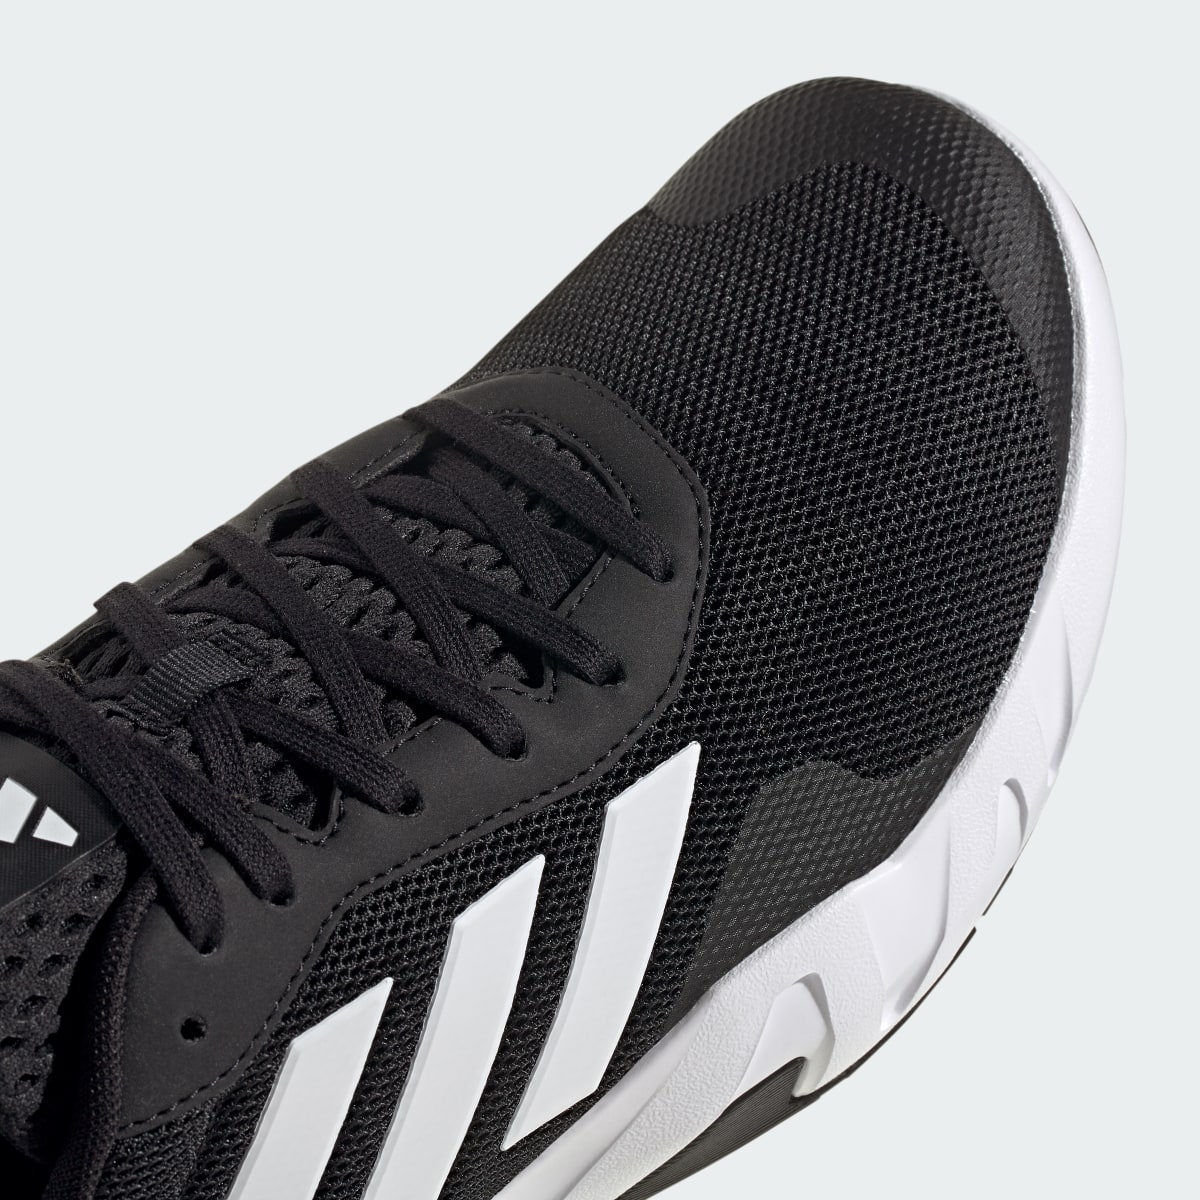 Adidas Amplimove Trainer Shoes. 10